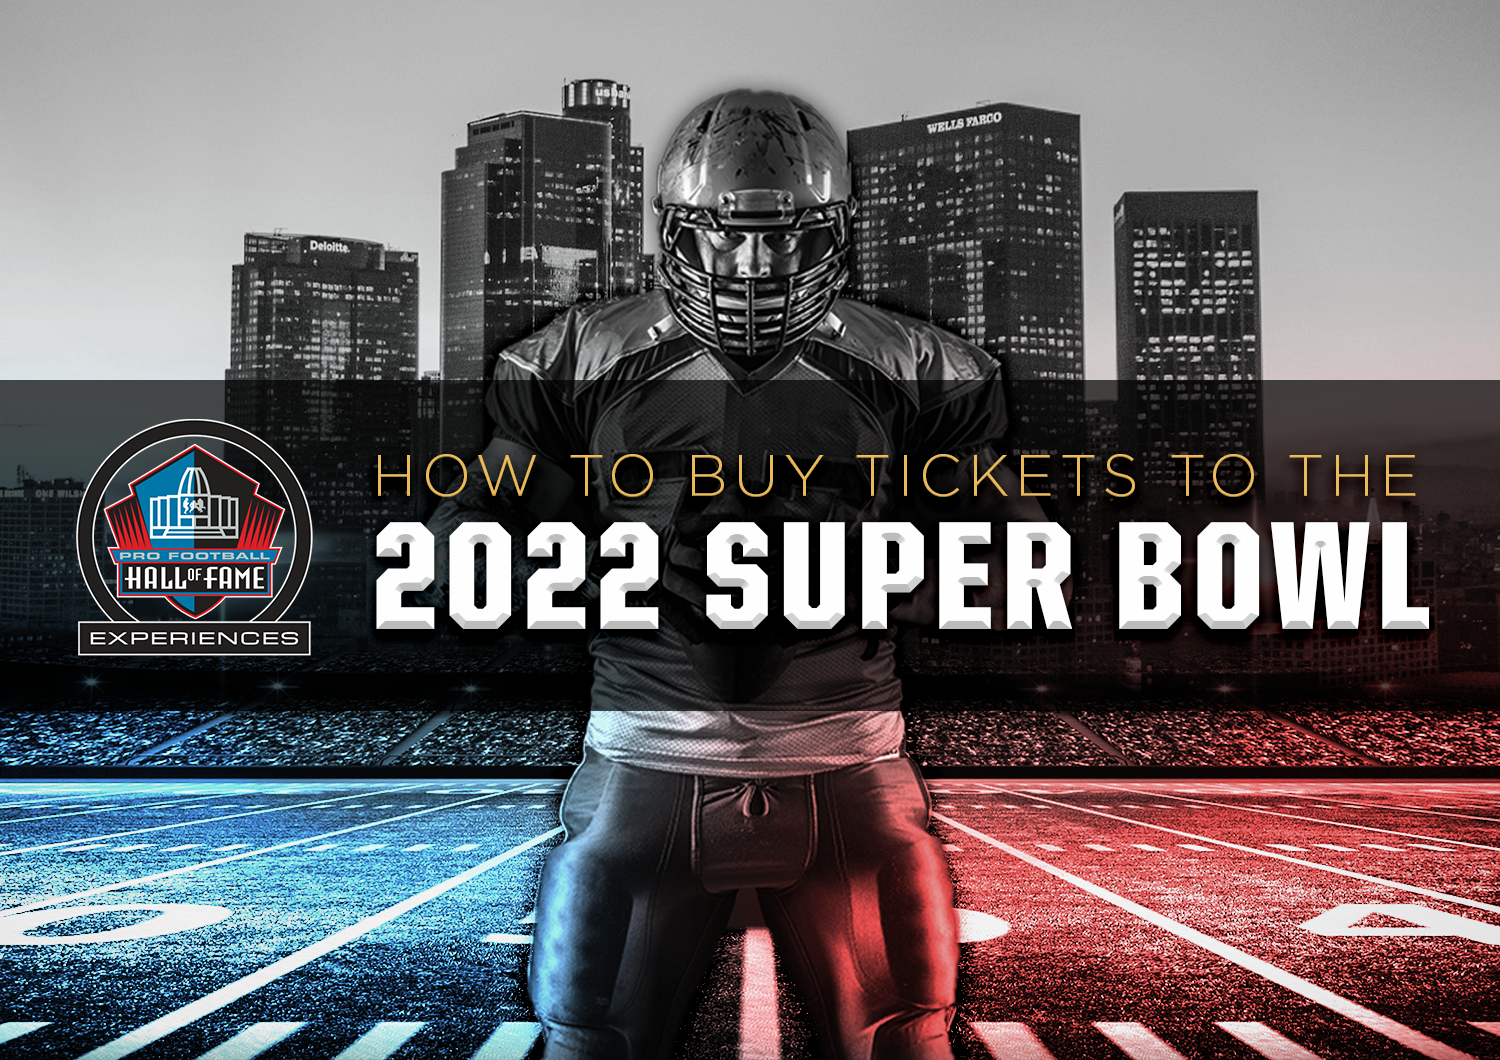 How to Buy 2022 Super Bowl Tickets